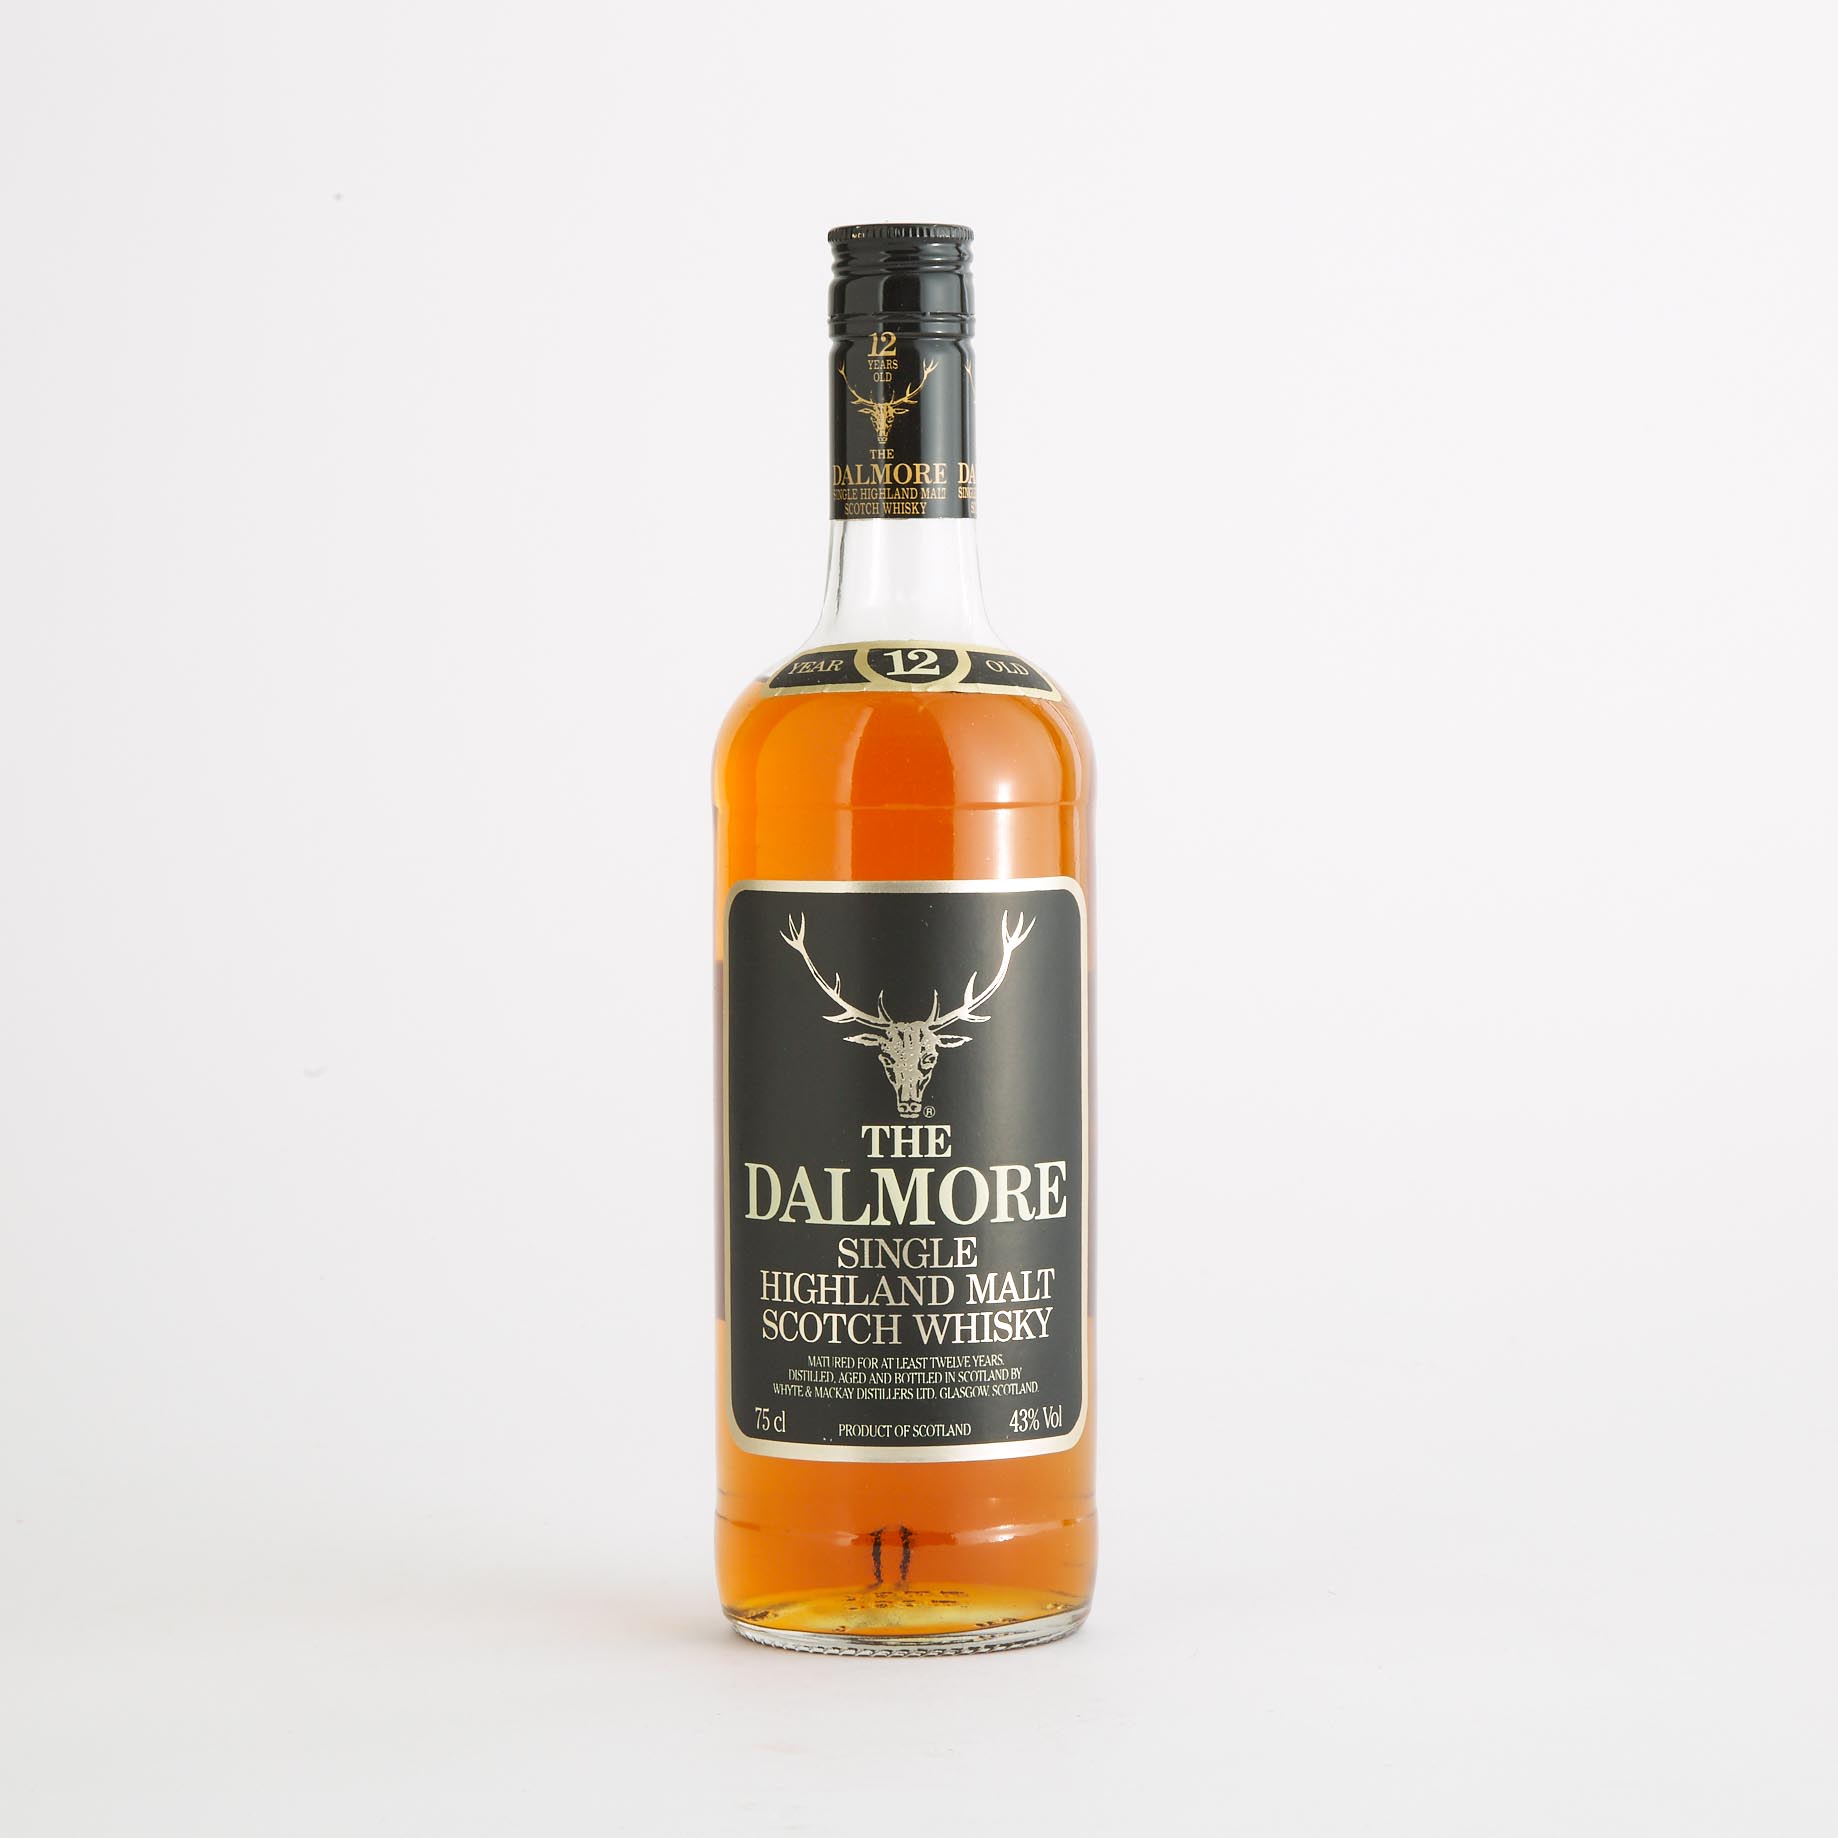 THE DALMORE SINGLE HIGHLAND MALT SCOTCH WHISKY 12 YEARS (ONE 75 CL)